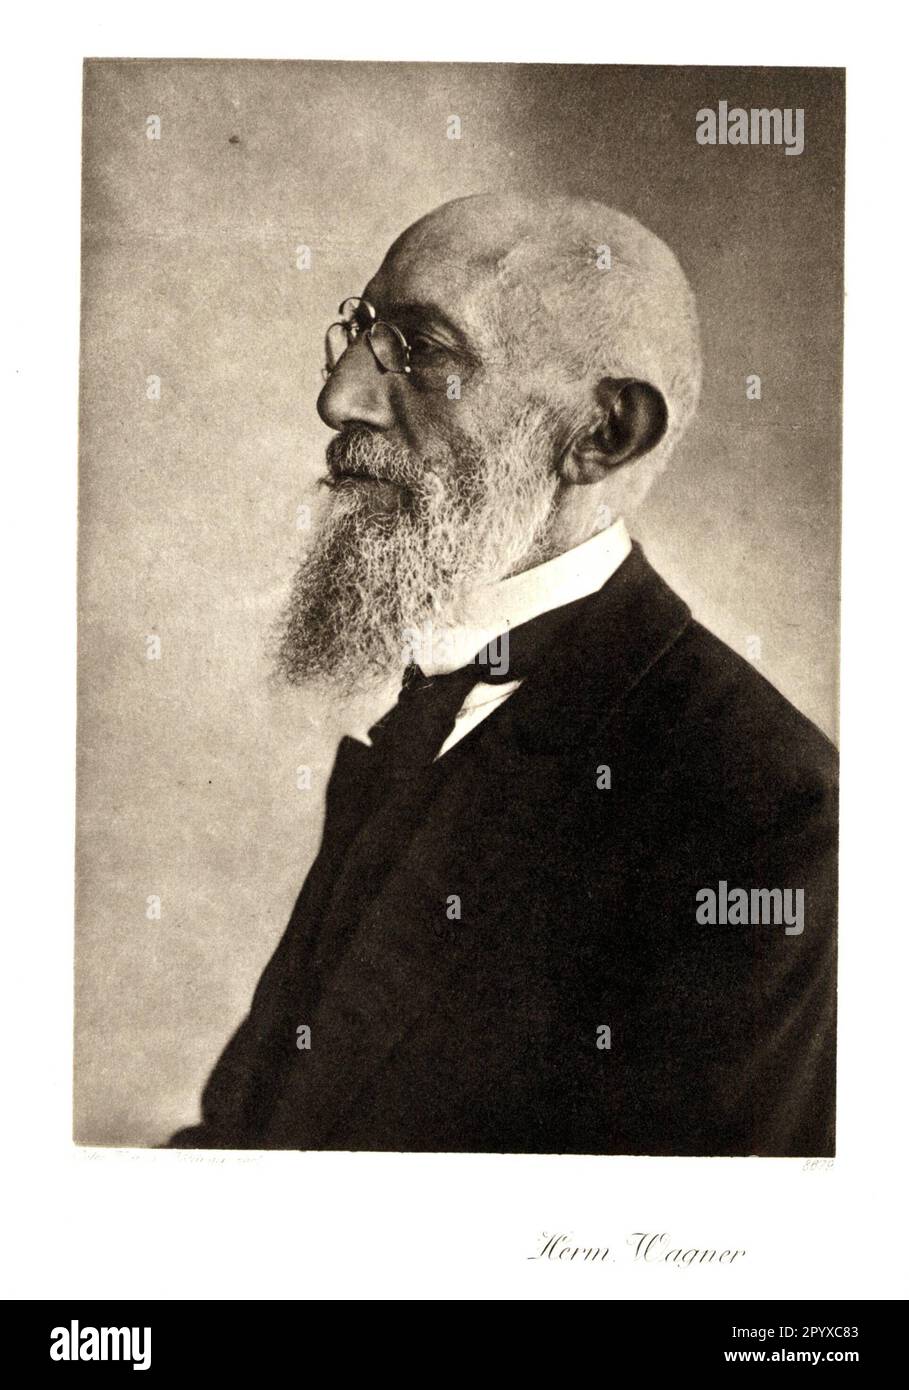 Hermann Wagner (1840-1929), German geographer. Wagner rendered outstanding services to the methodology and expansion of geography. Photograph by Peter Matzen, Göttingen. Photo: Heliogravure, Corpus Imaginum, Hanfstaengl Collection. [automated translation] Stock Photo